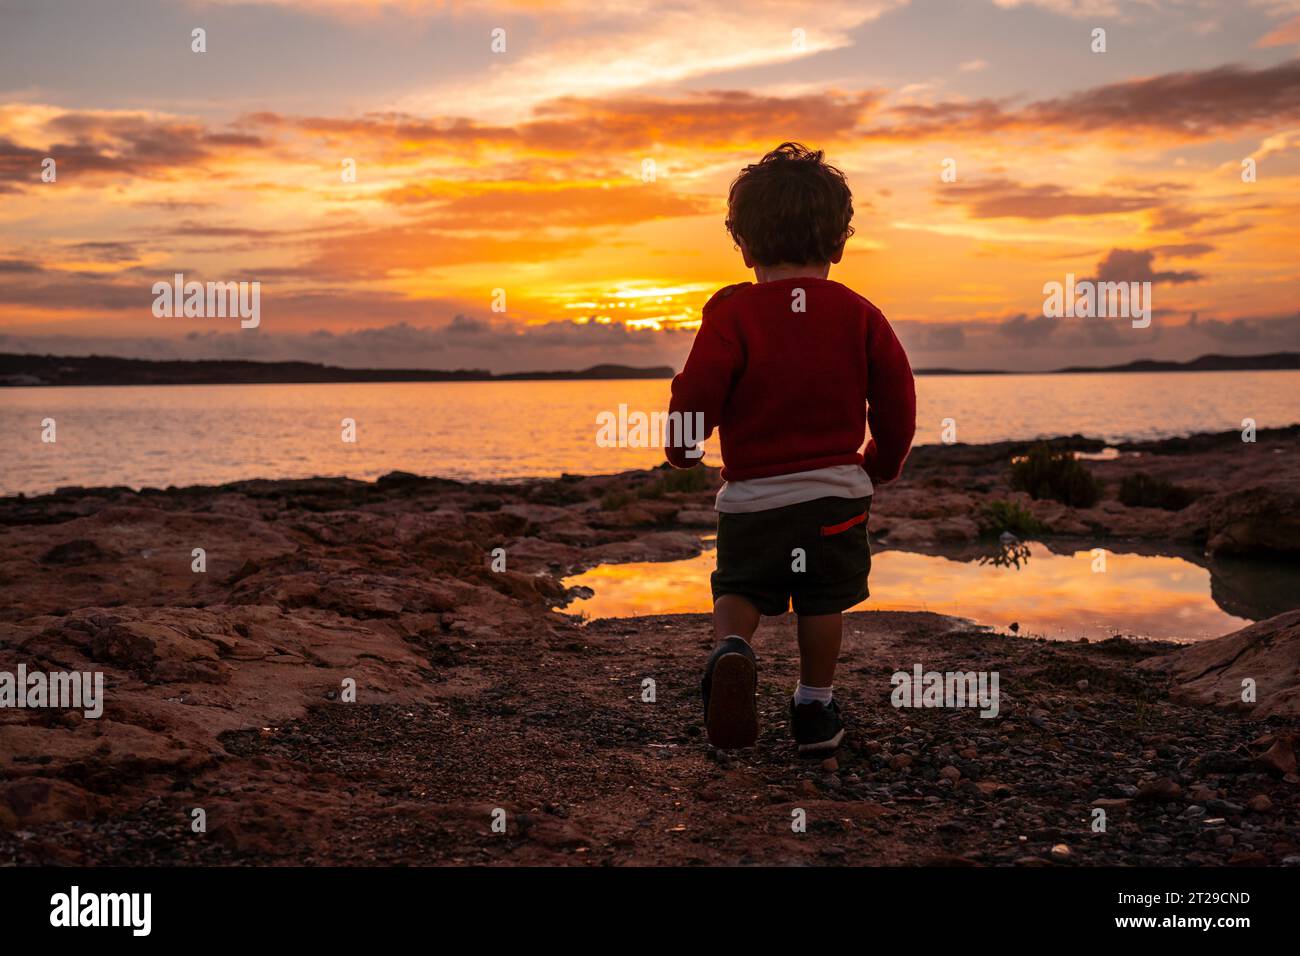 Sunset in Ibiza on vacation, a child running and laughing by the sea in San Antonio Abad Stock Photo